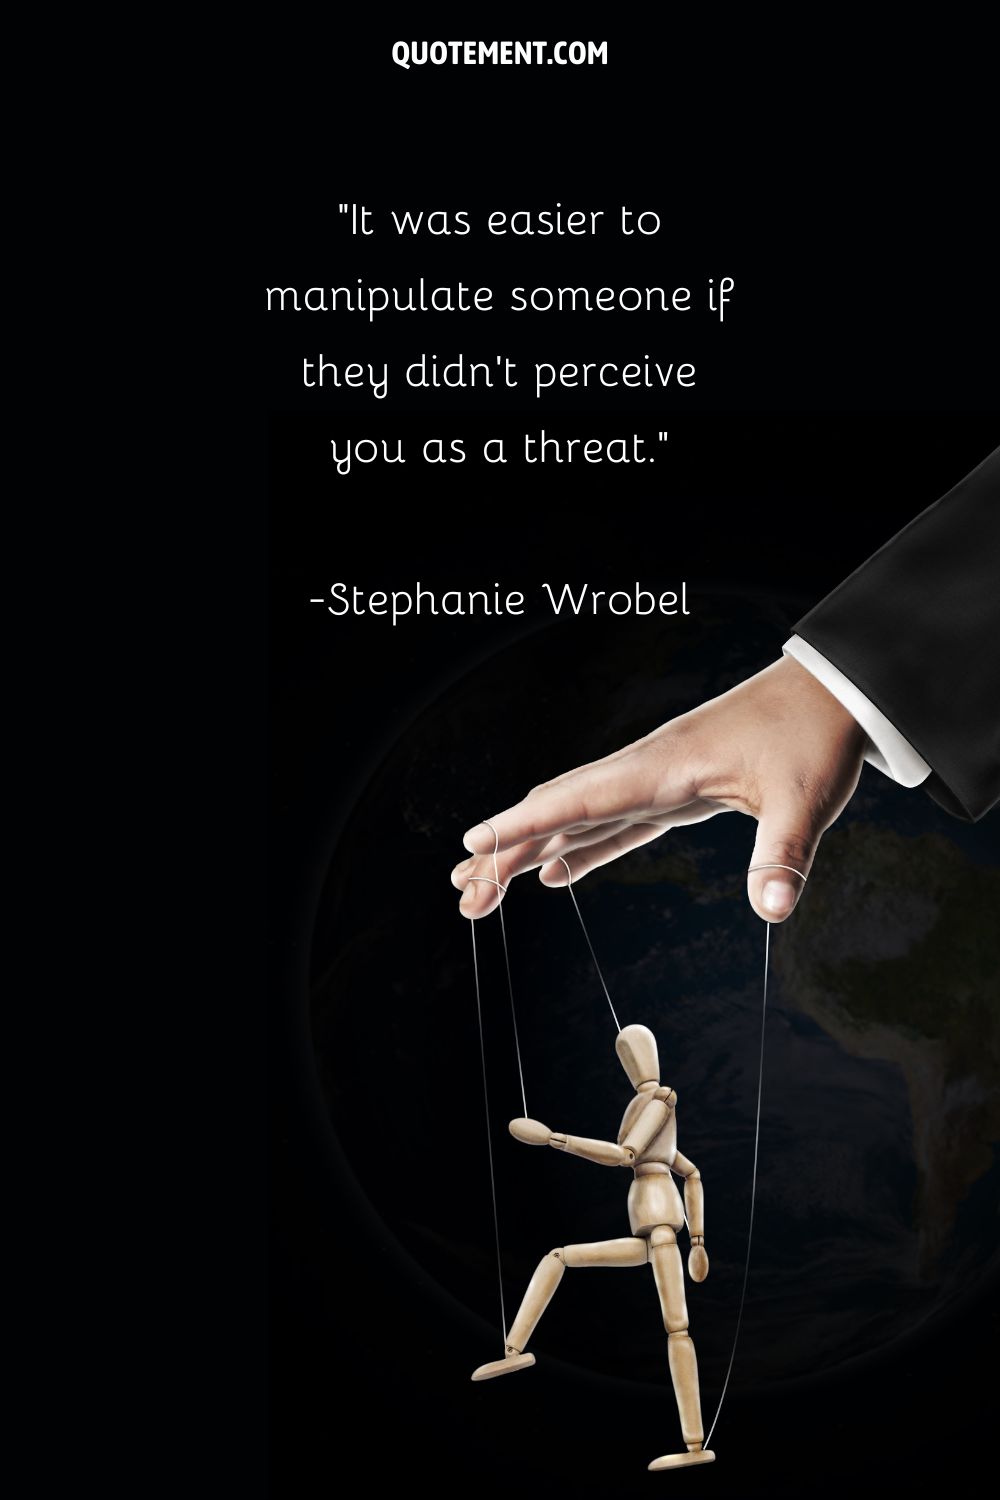 hand and marionette image representing manipulation quote